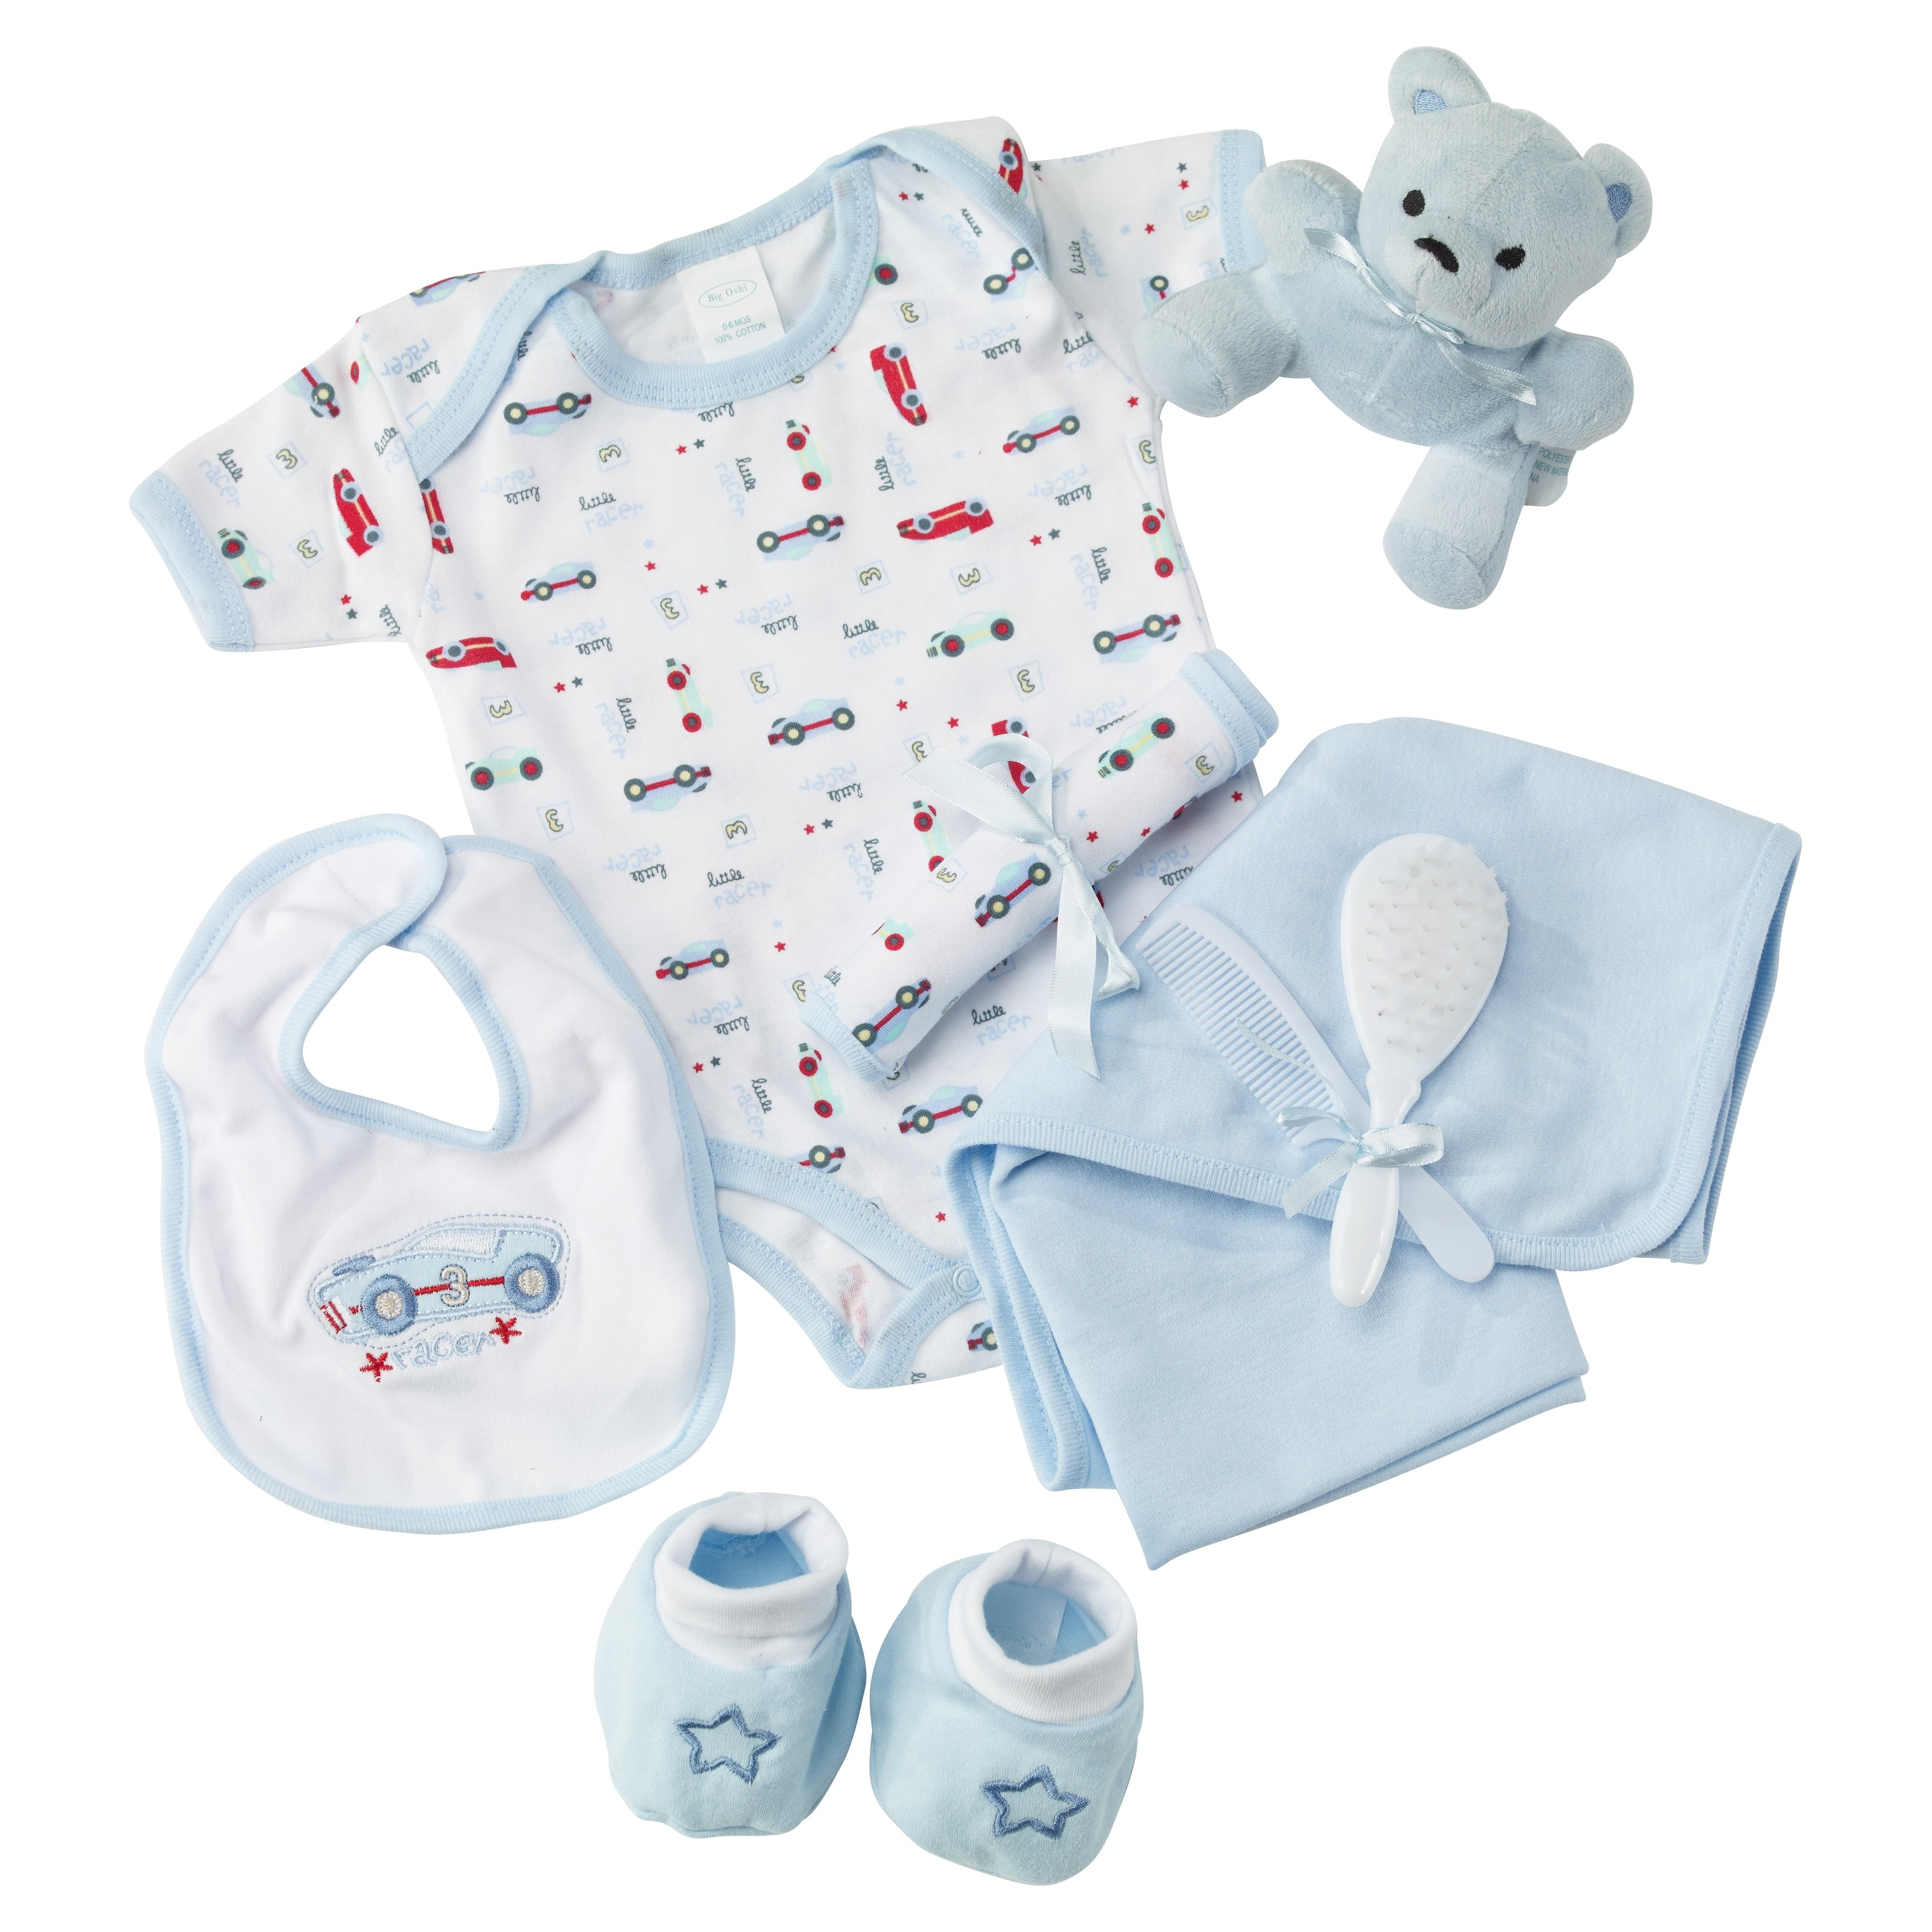 Big Oshi Baby Essentials Gift Basket 9-Piece Layette Set Infant up to 0-6 Mon... 